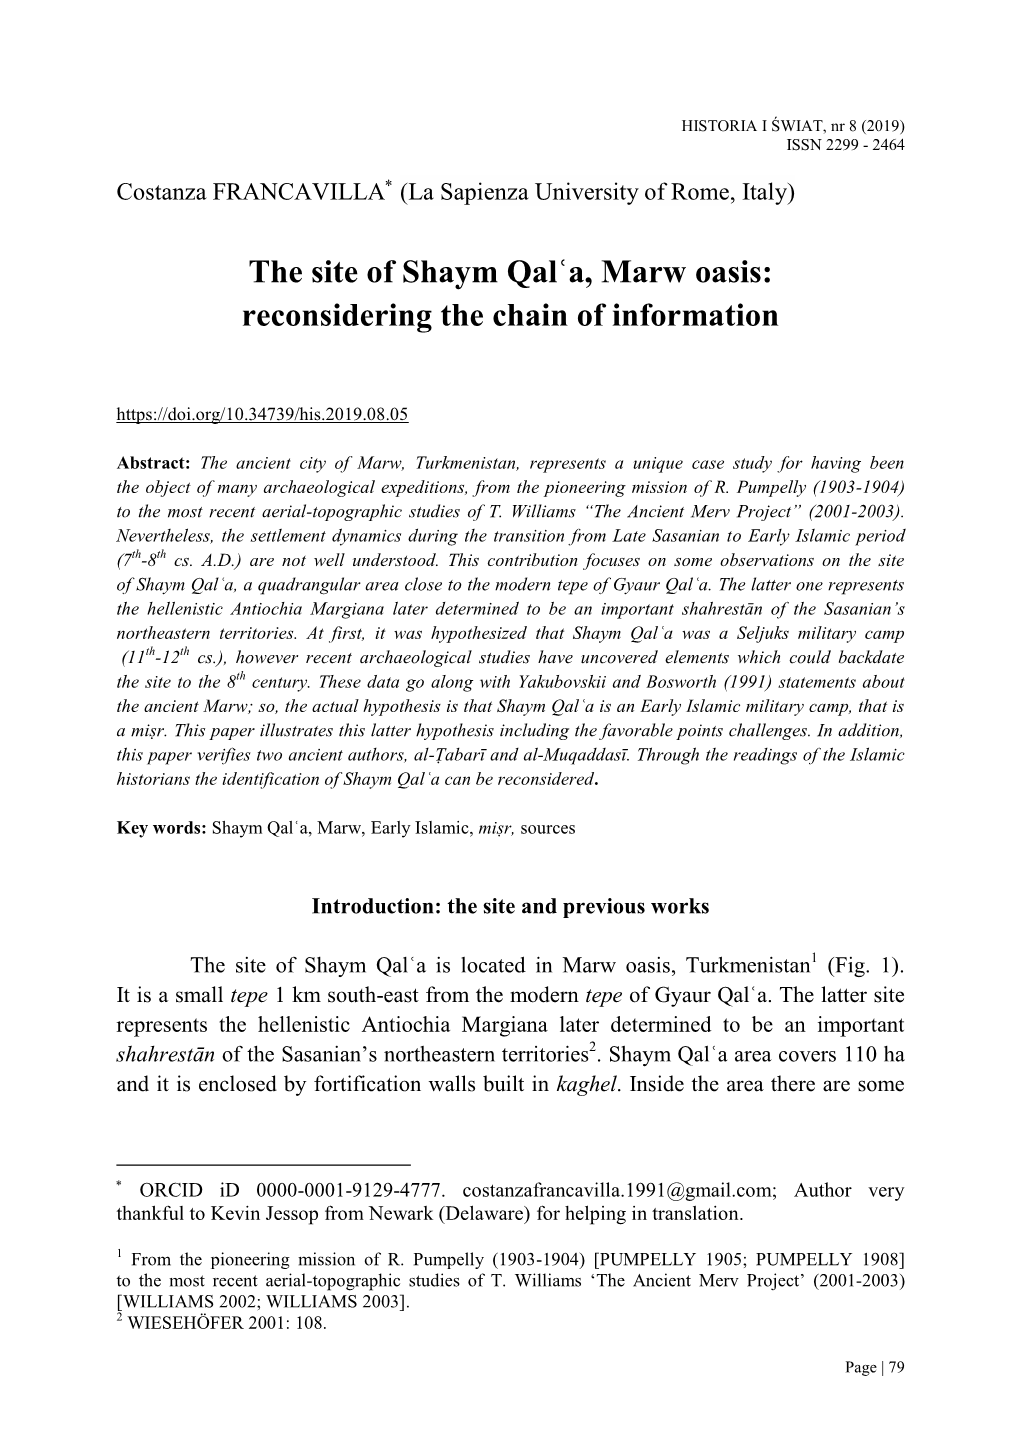 The Site of Shaym Qalʿa, Marw Oasis: Reconsidering the Chain of Information